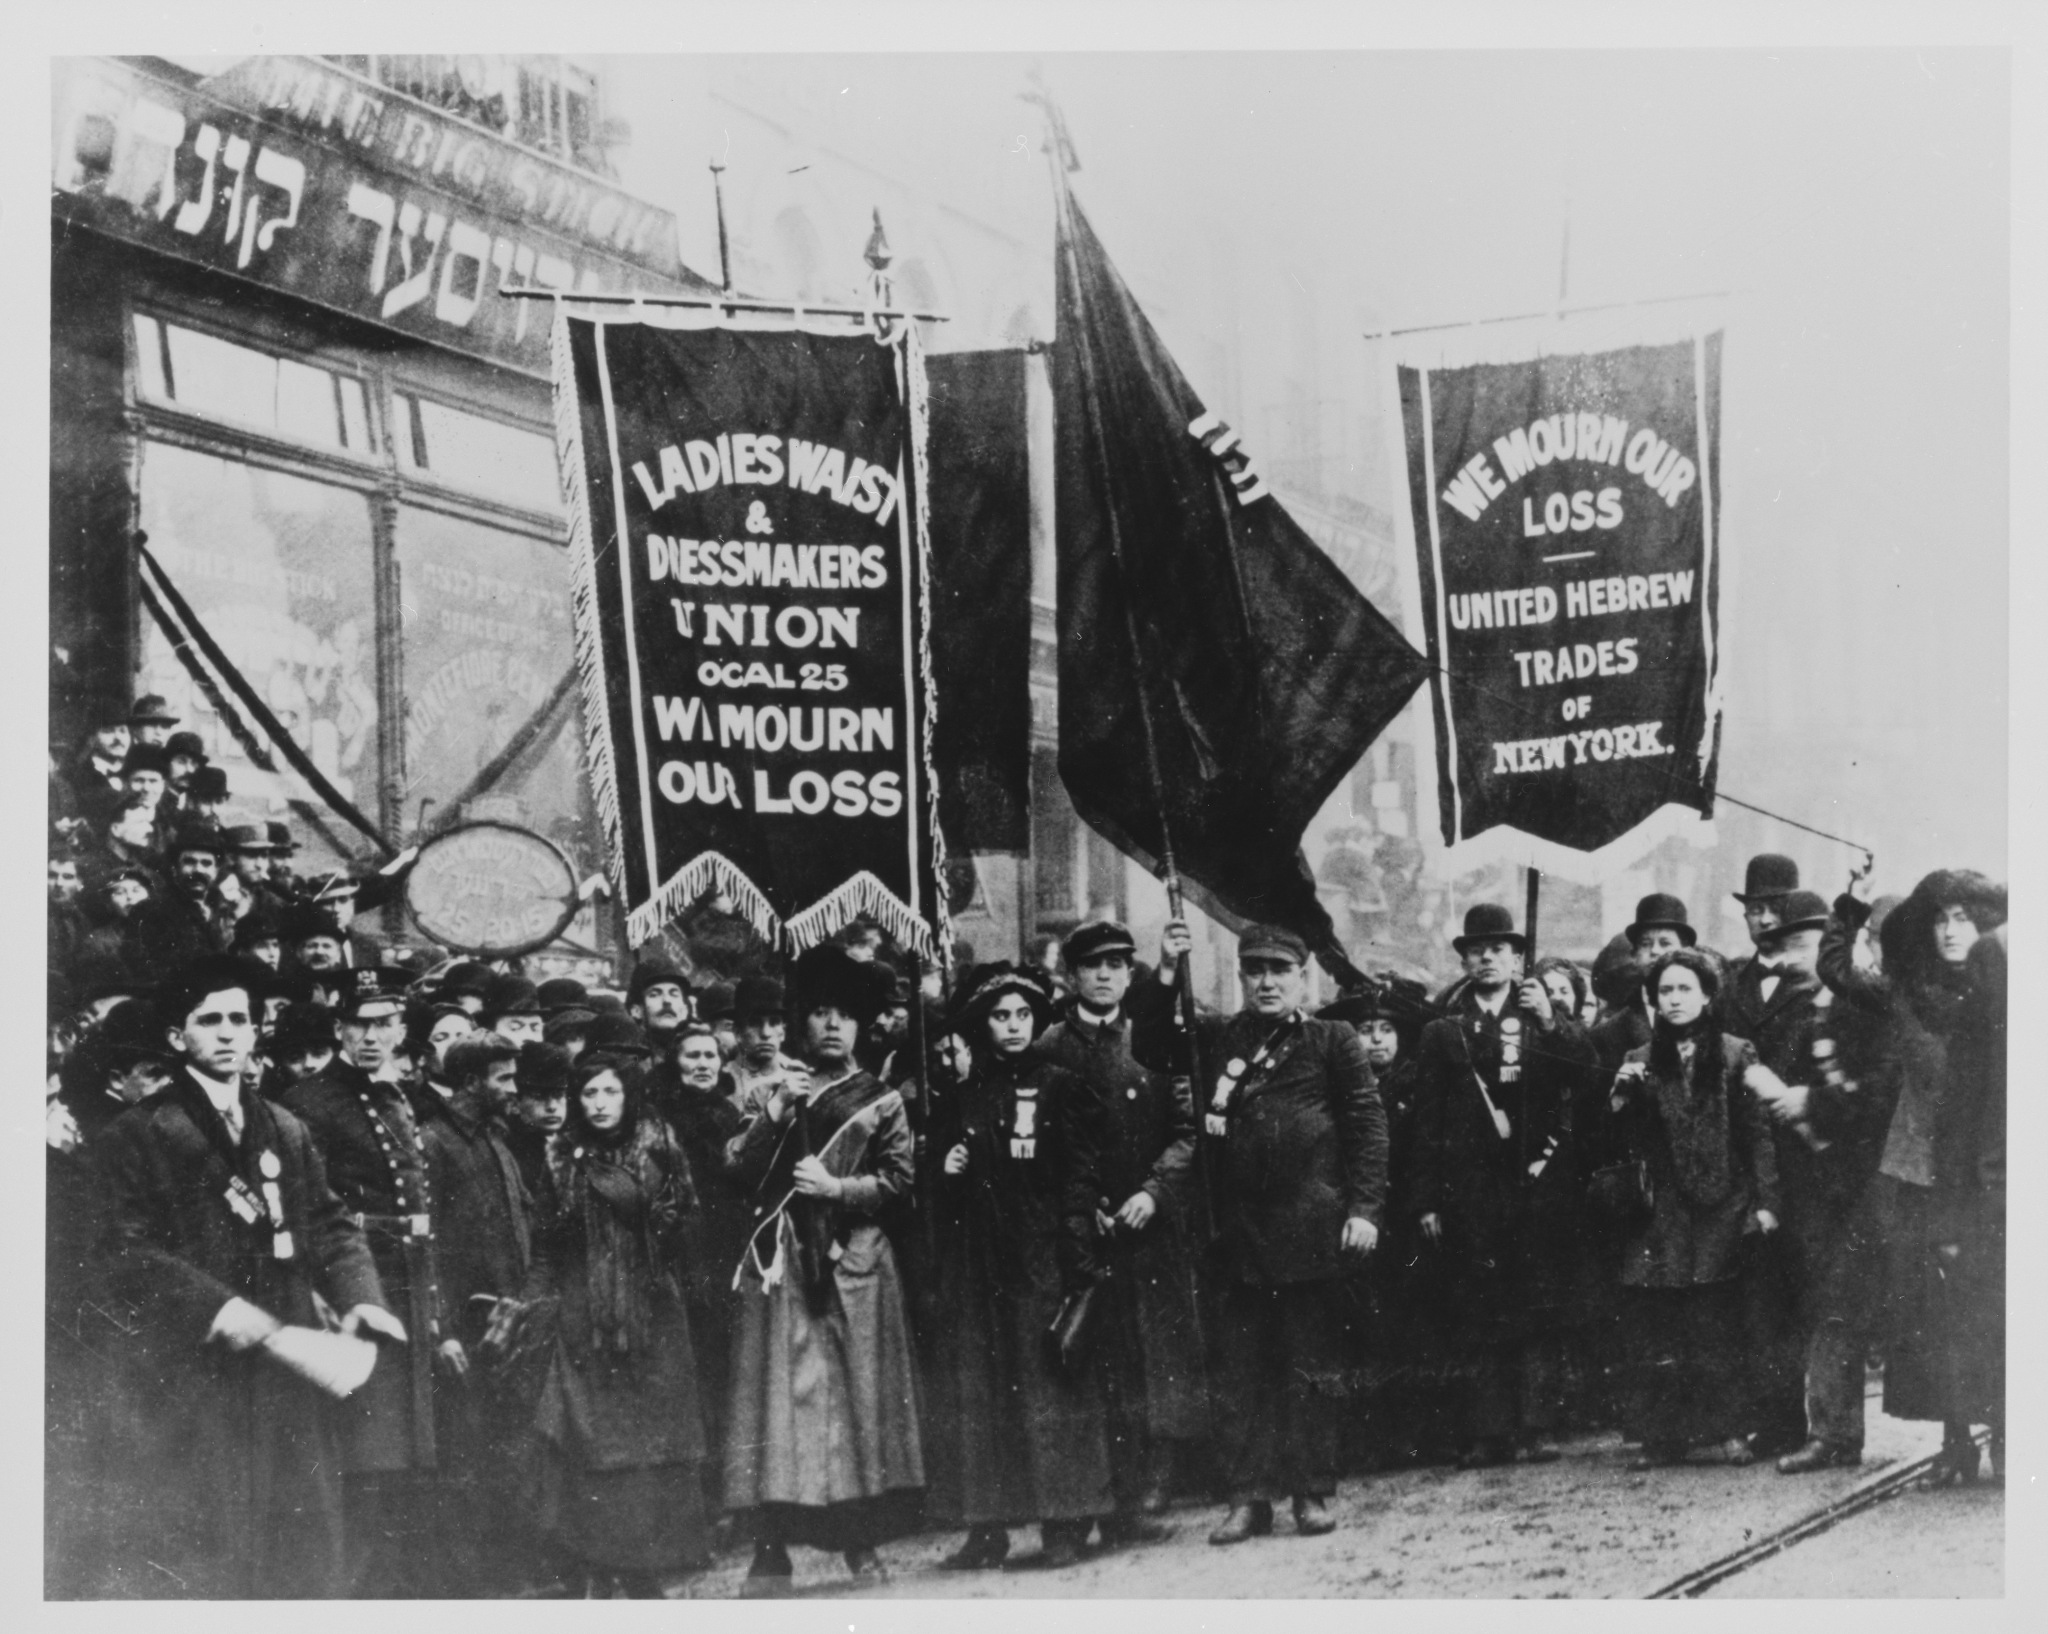 Protest after the Triangle Shirtwaist Fire